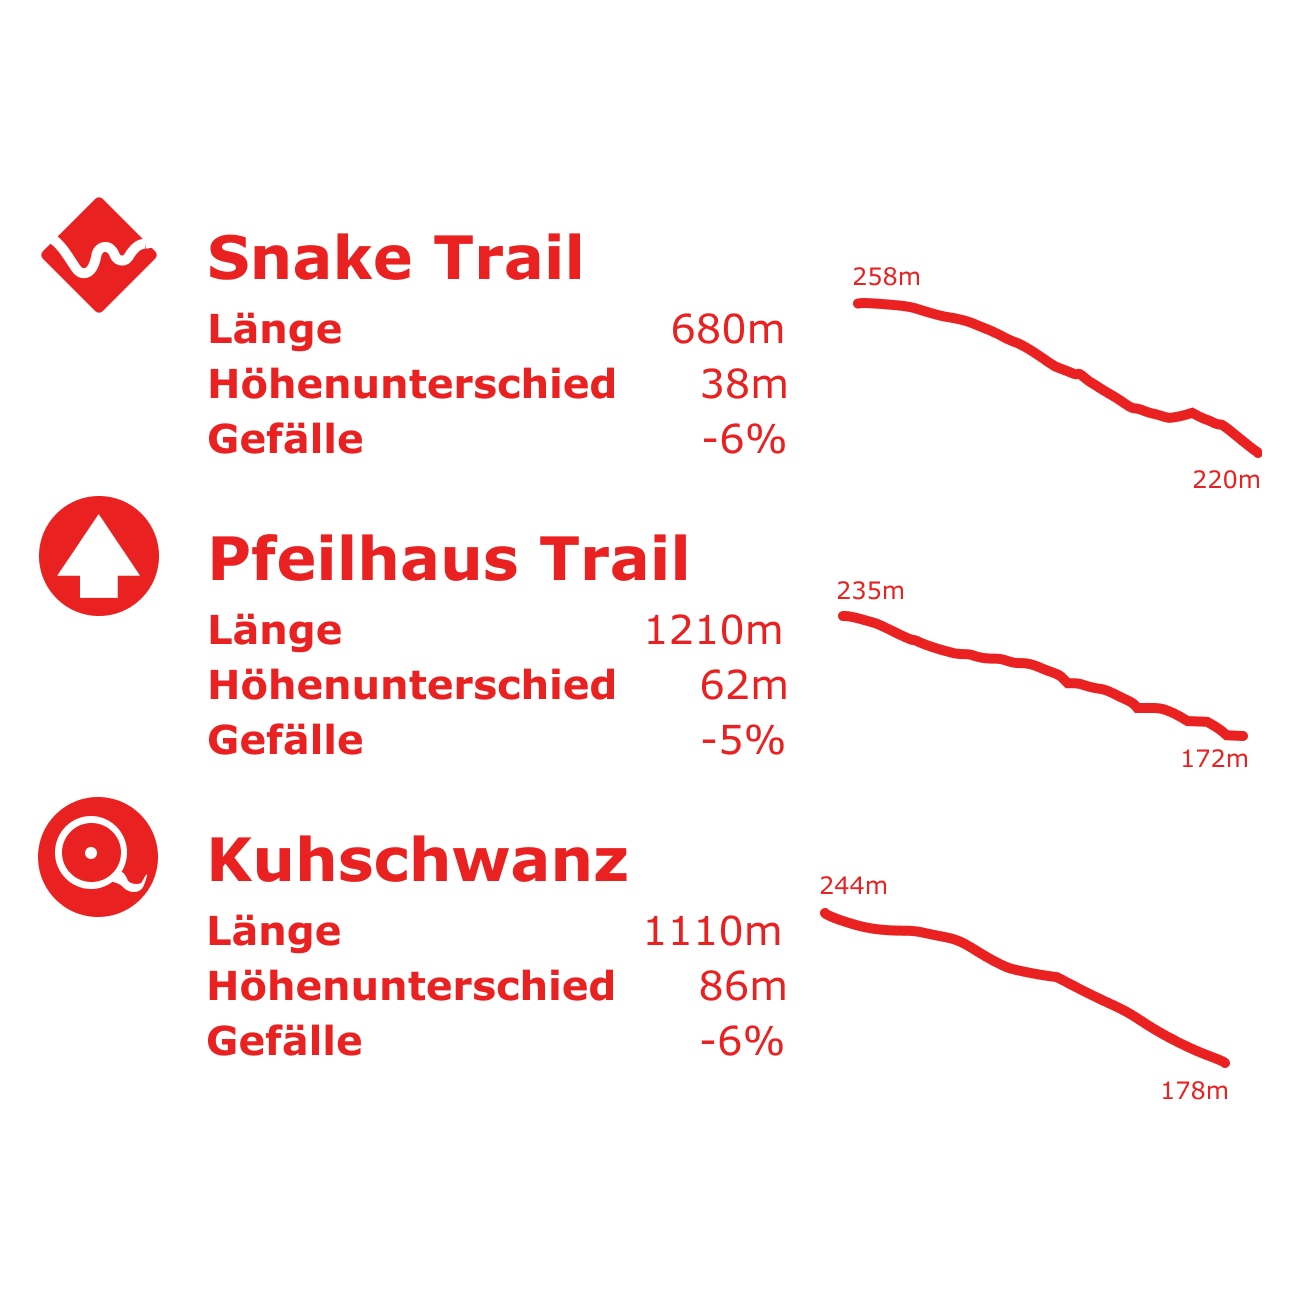 A legend of a trail map in red with pictograms for trails